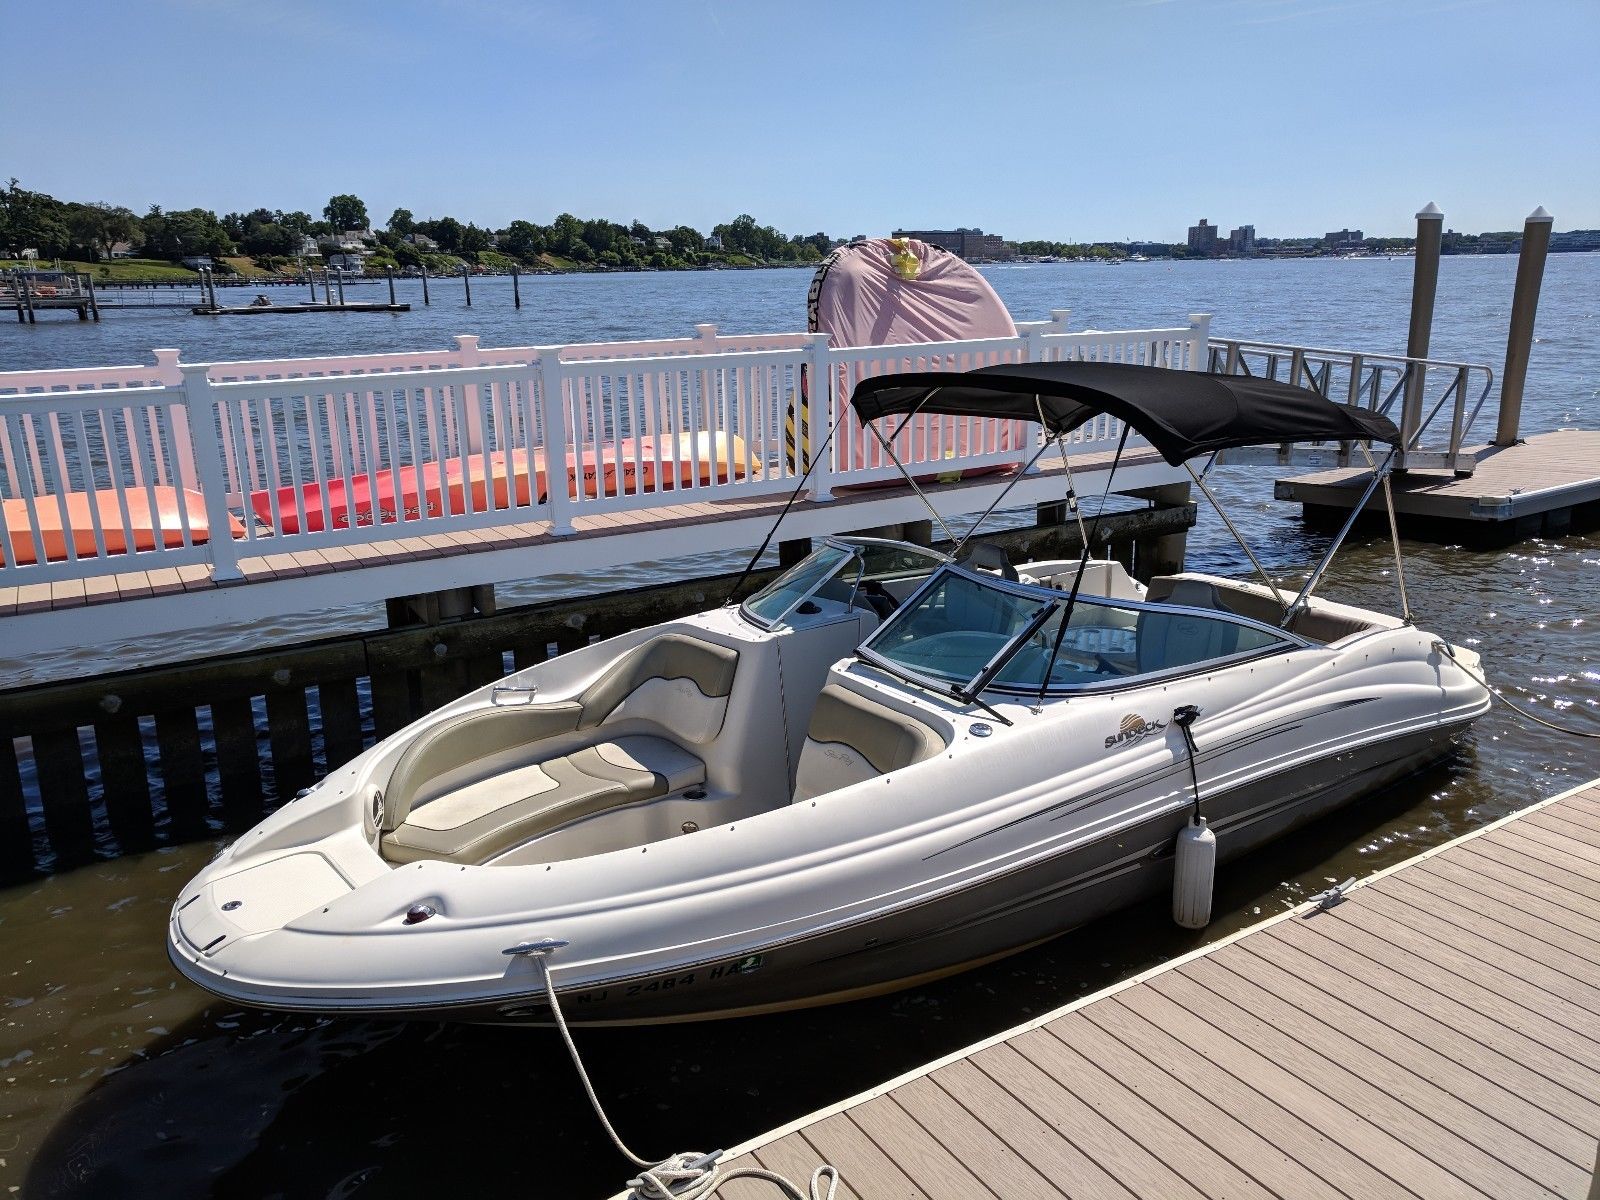 Sea Ray 220 Sundeck: Prices, Specs, Reviews and Sales Information - itBoat